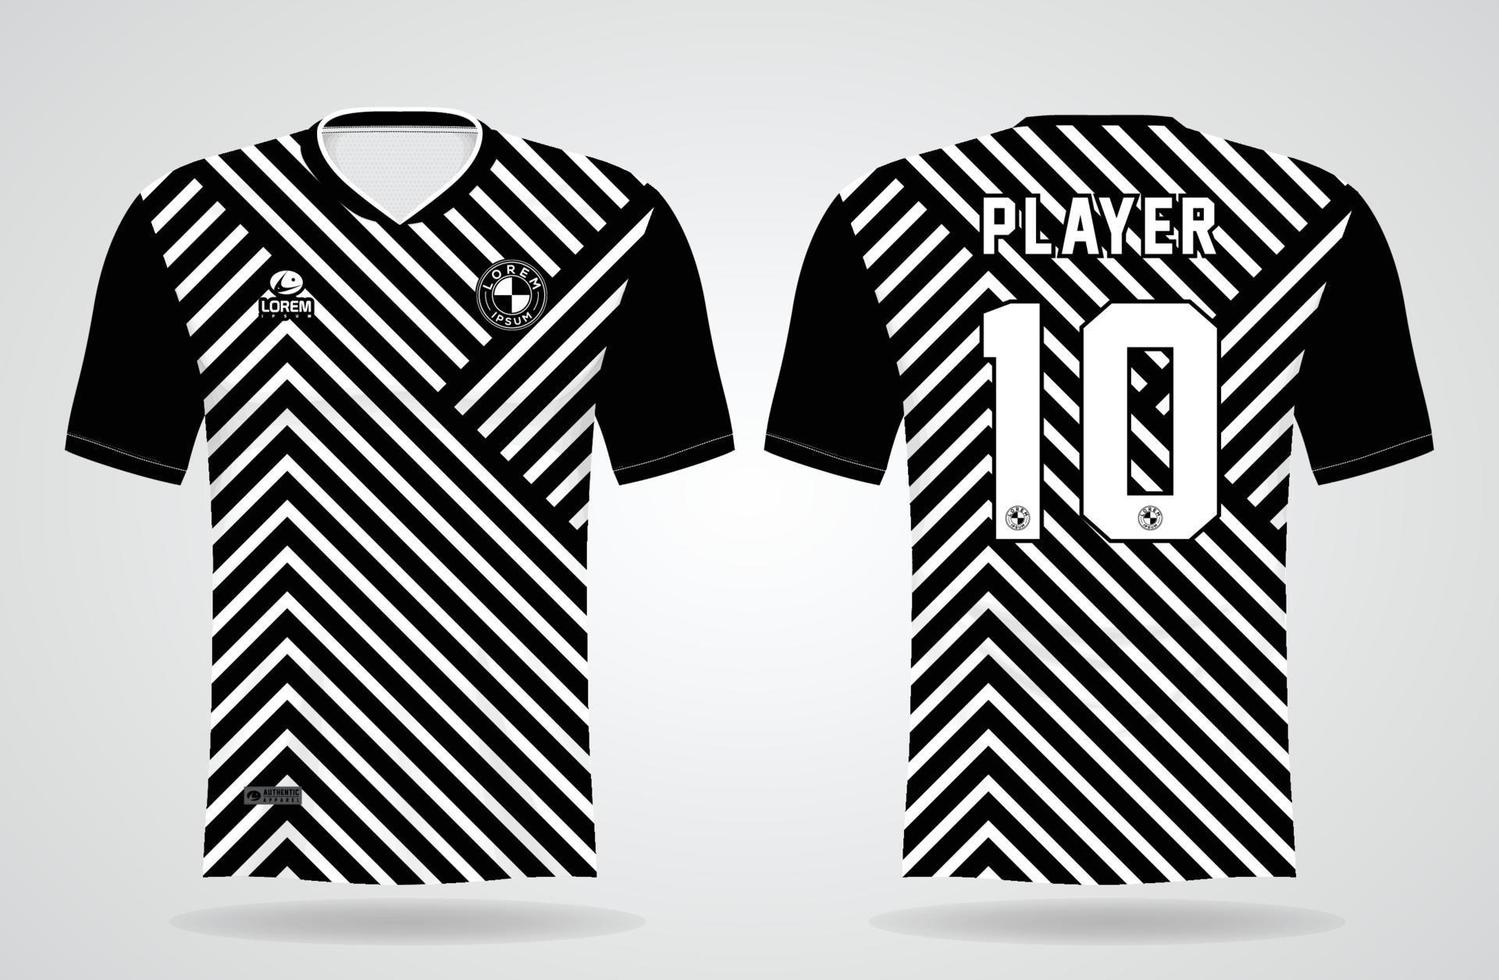 black white sports jersey template for team uniforms and Soccer t shirt design vector